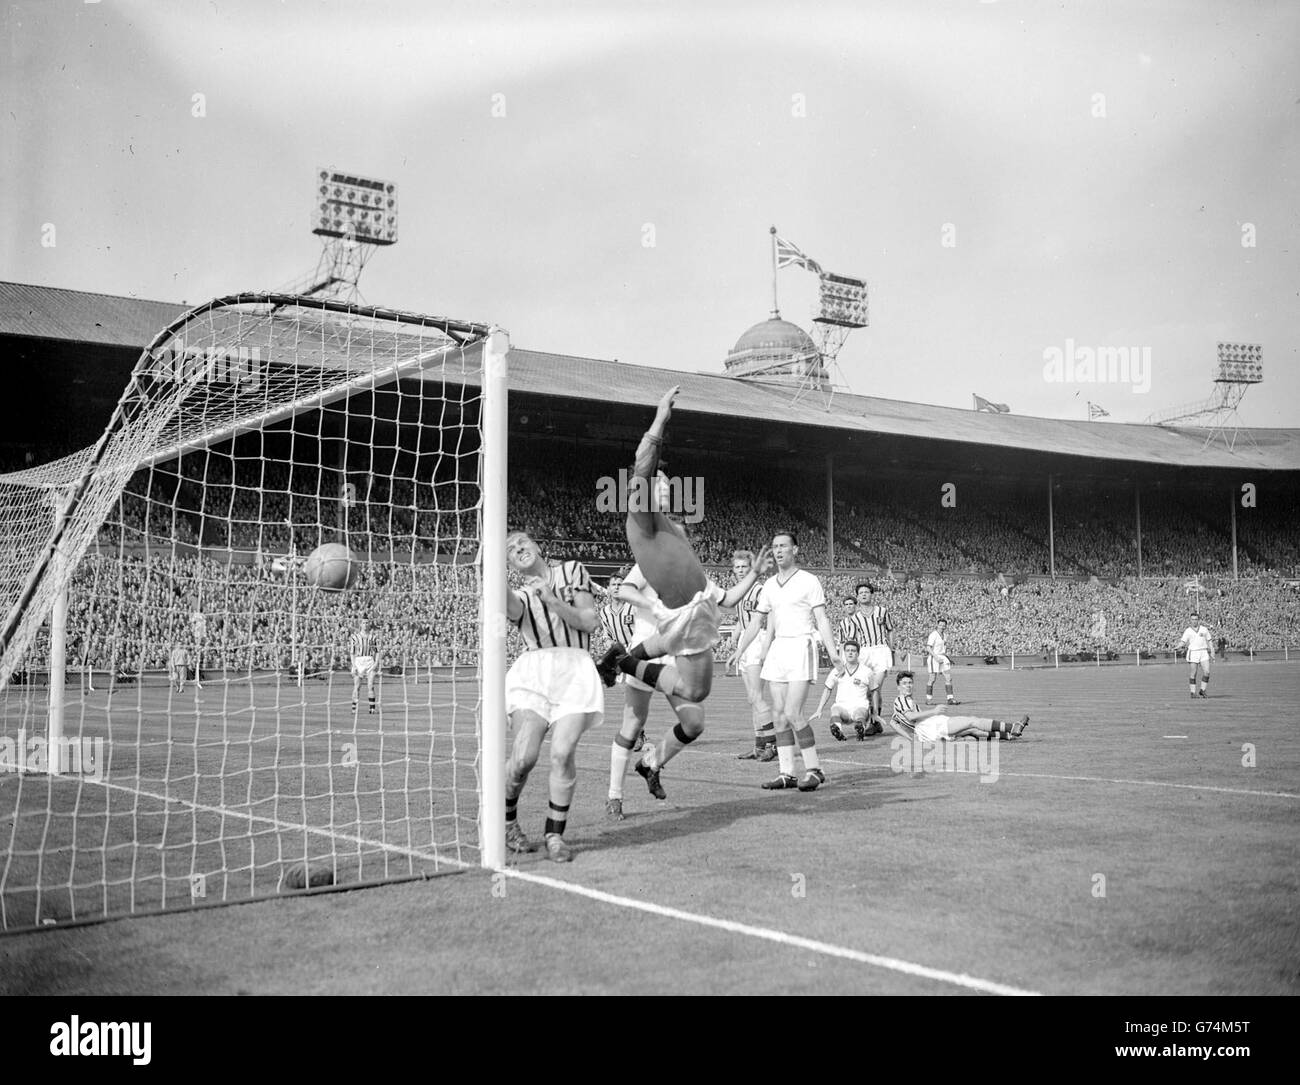 Manchester's consolation goal scored in the last minute by Tommy Taylor (seated on ground, white shirt) from a corner by Duncan Edwards in the FA Cup Final between Manchester United and Aston Villa at the Empire Stadium, Wembley. Villa won 2-1 to notch a record seventh FA Cup Final Win. Stock Photo